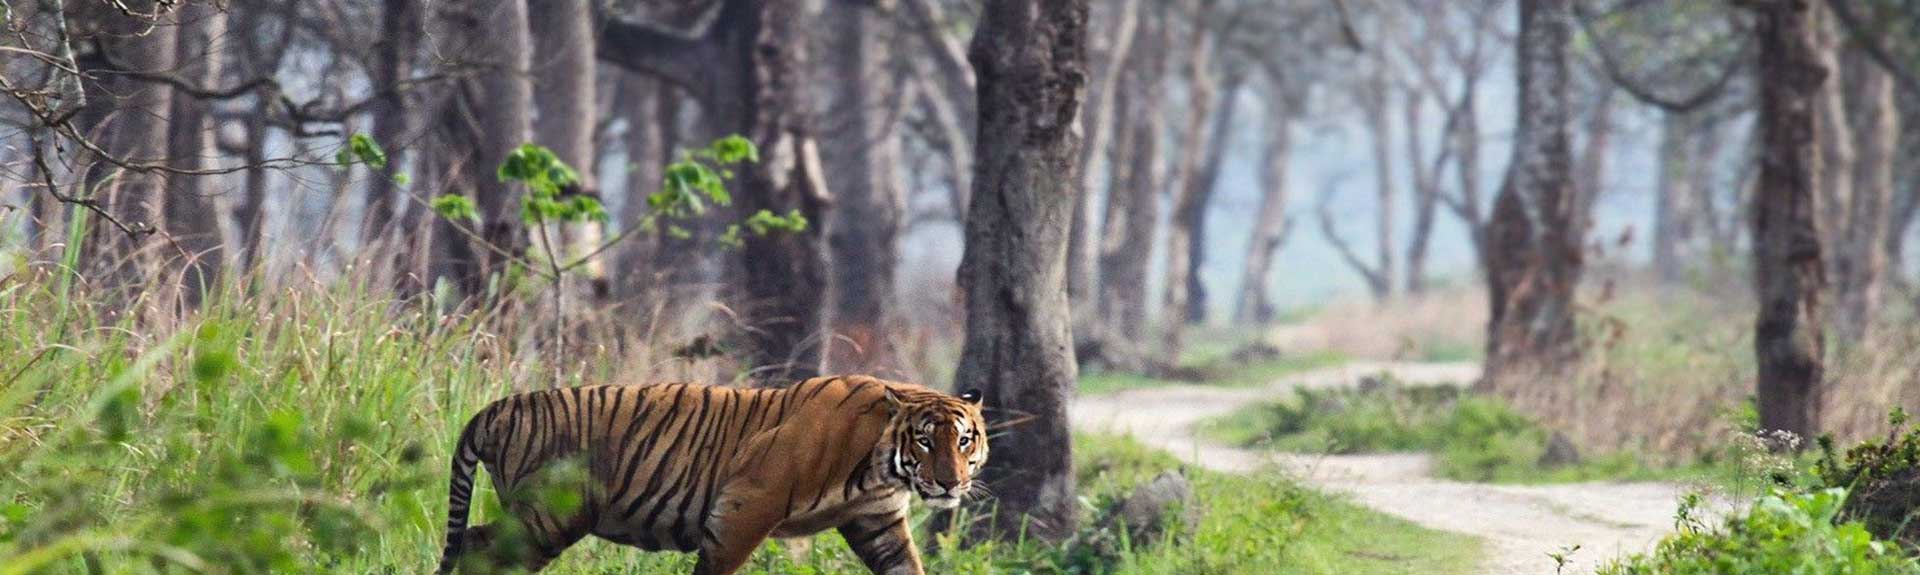 Ranthambore - Tourism Spot in India